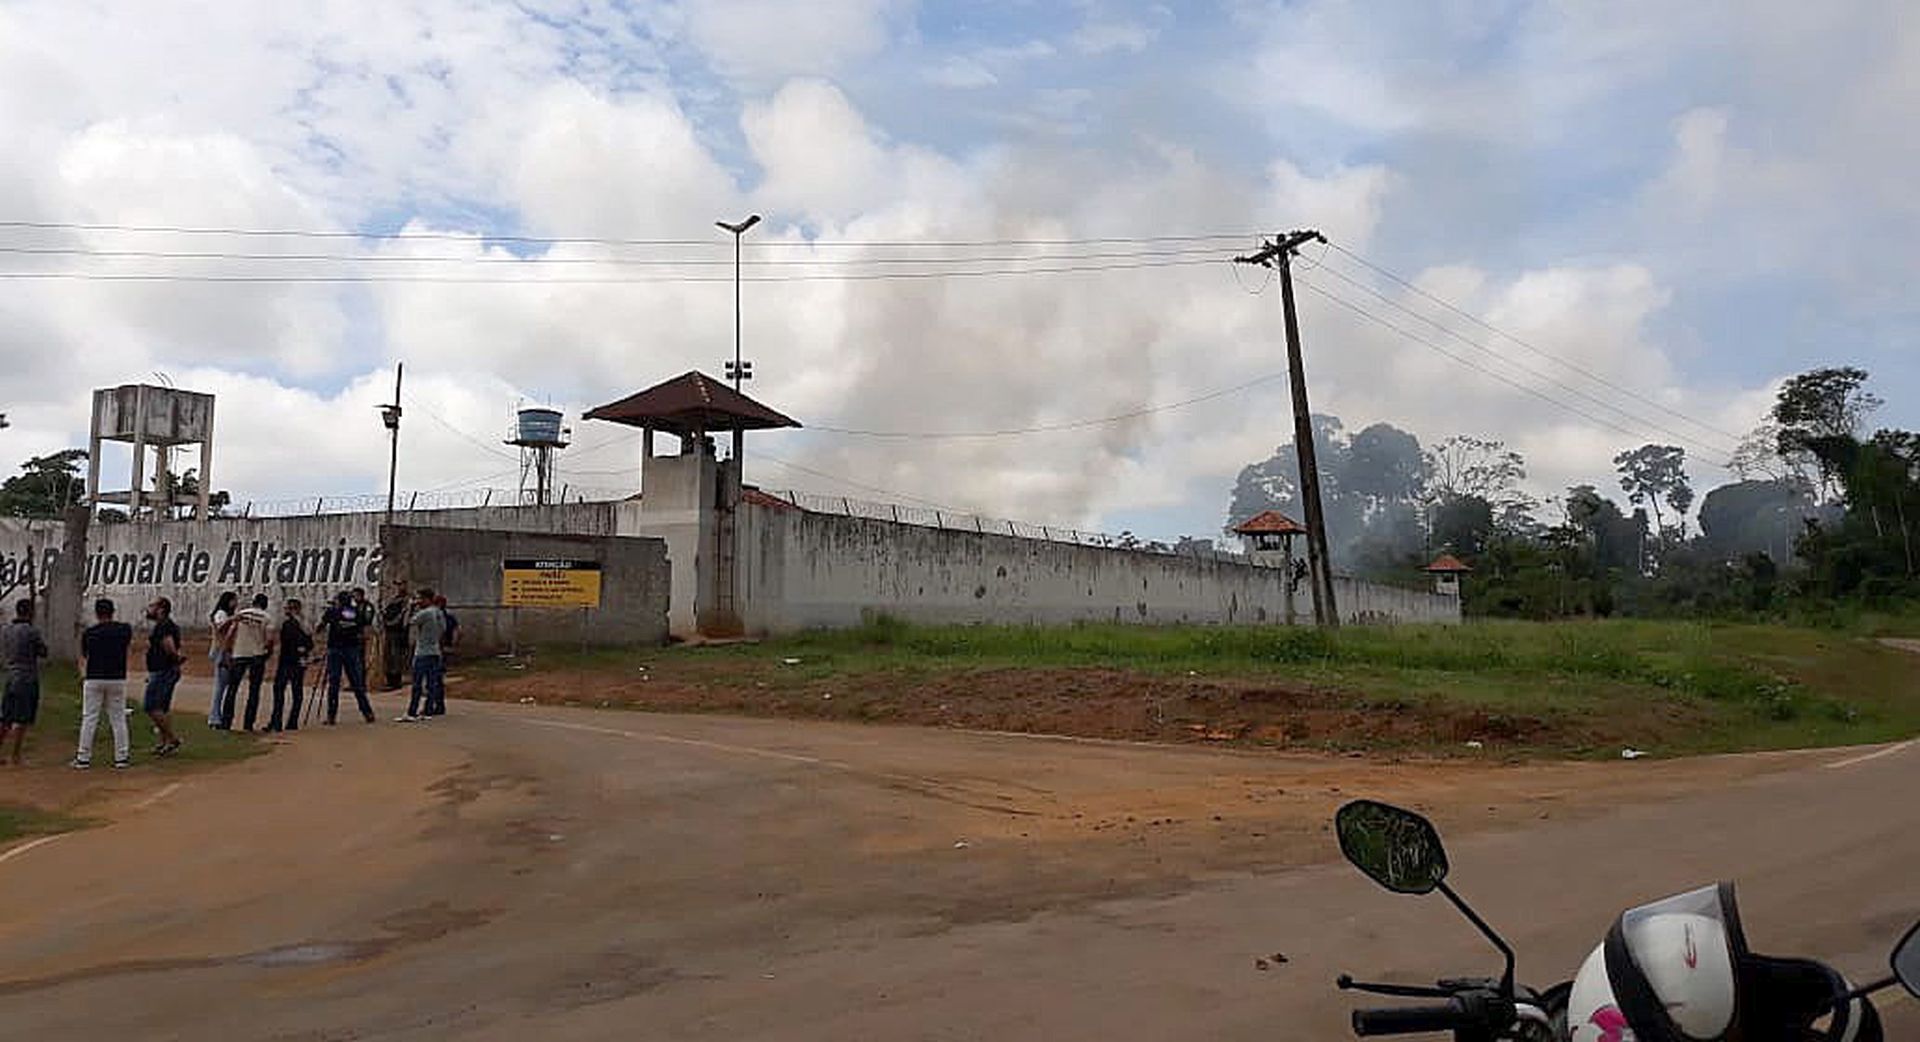 epa07747880 A handout photo made available by XINGU 230 shows a group of journalist waiting outside of a prison in Altamira, state of Para, Brazil, 29 July 2019. At least 52 prisoners died during clashes between rival groups inside the Altamira Regional Recovery Center.  EPA/XINGU 230 HANDOUT BEST QUALITY AVAILABLE HANDOUT EDITORIAL USE ONLY/NO SALES